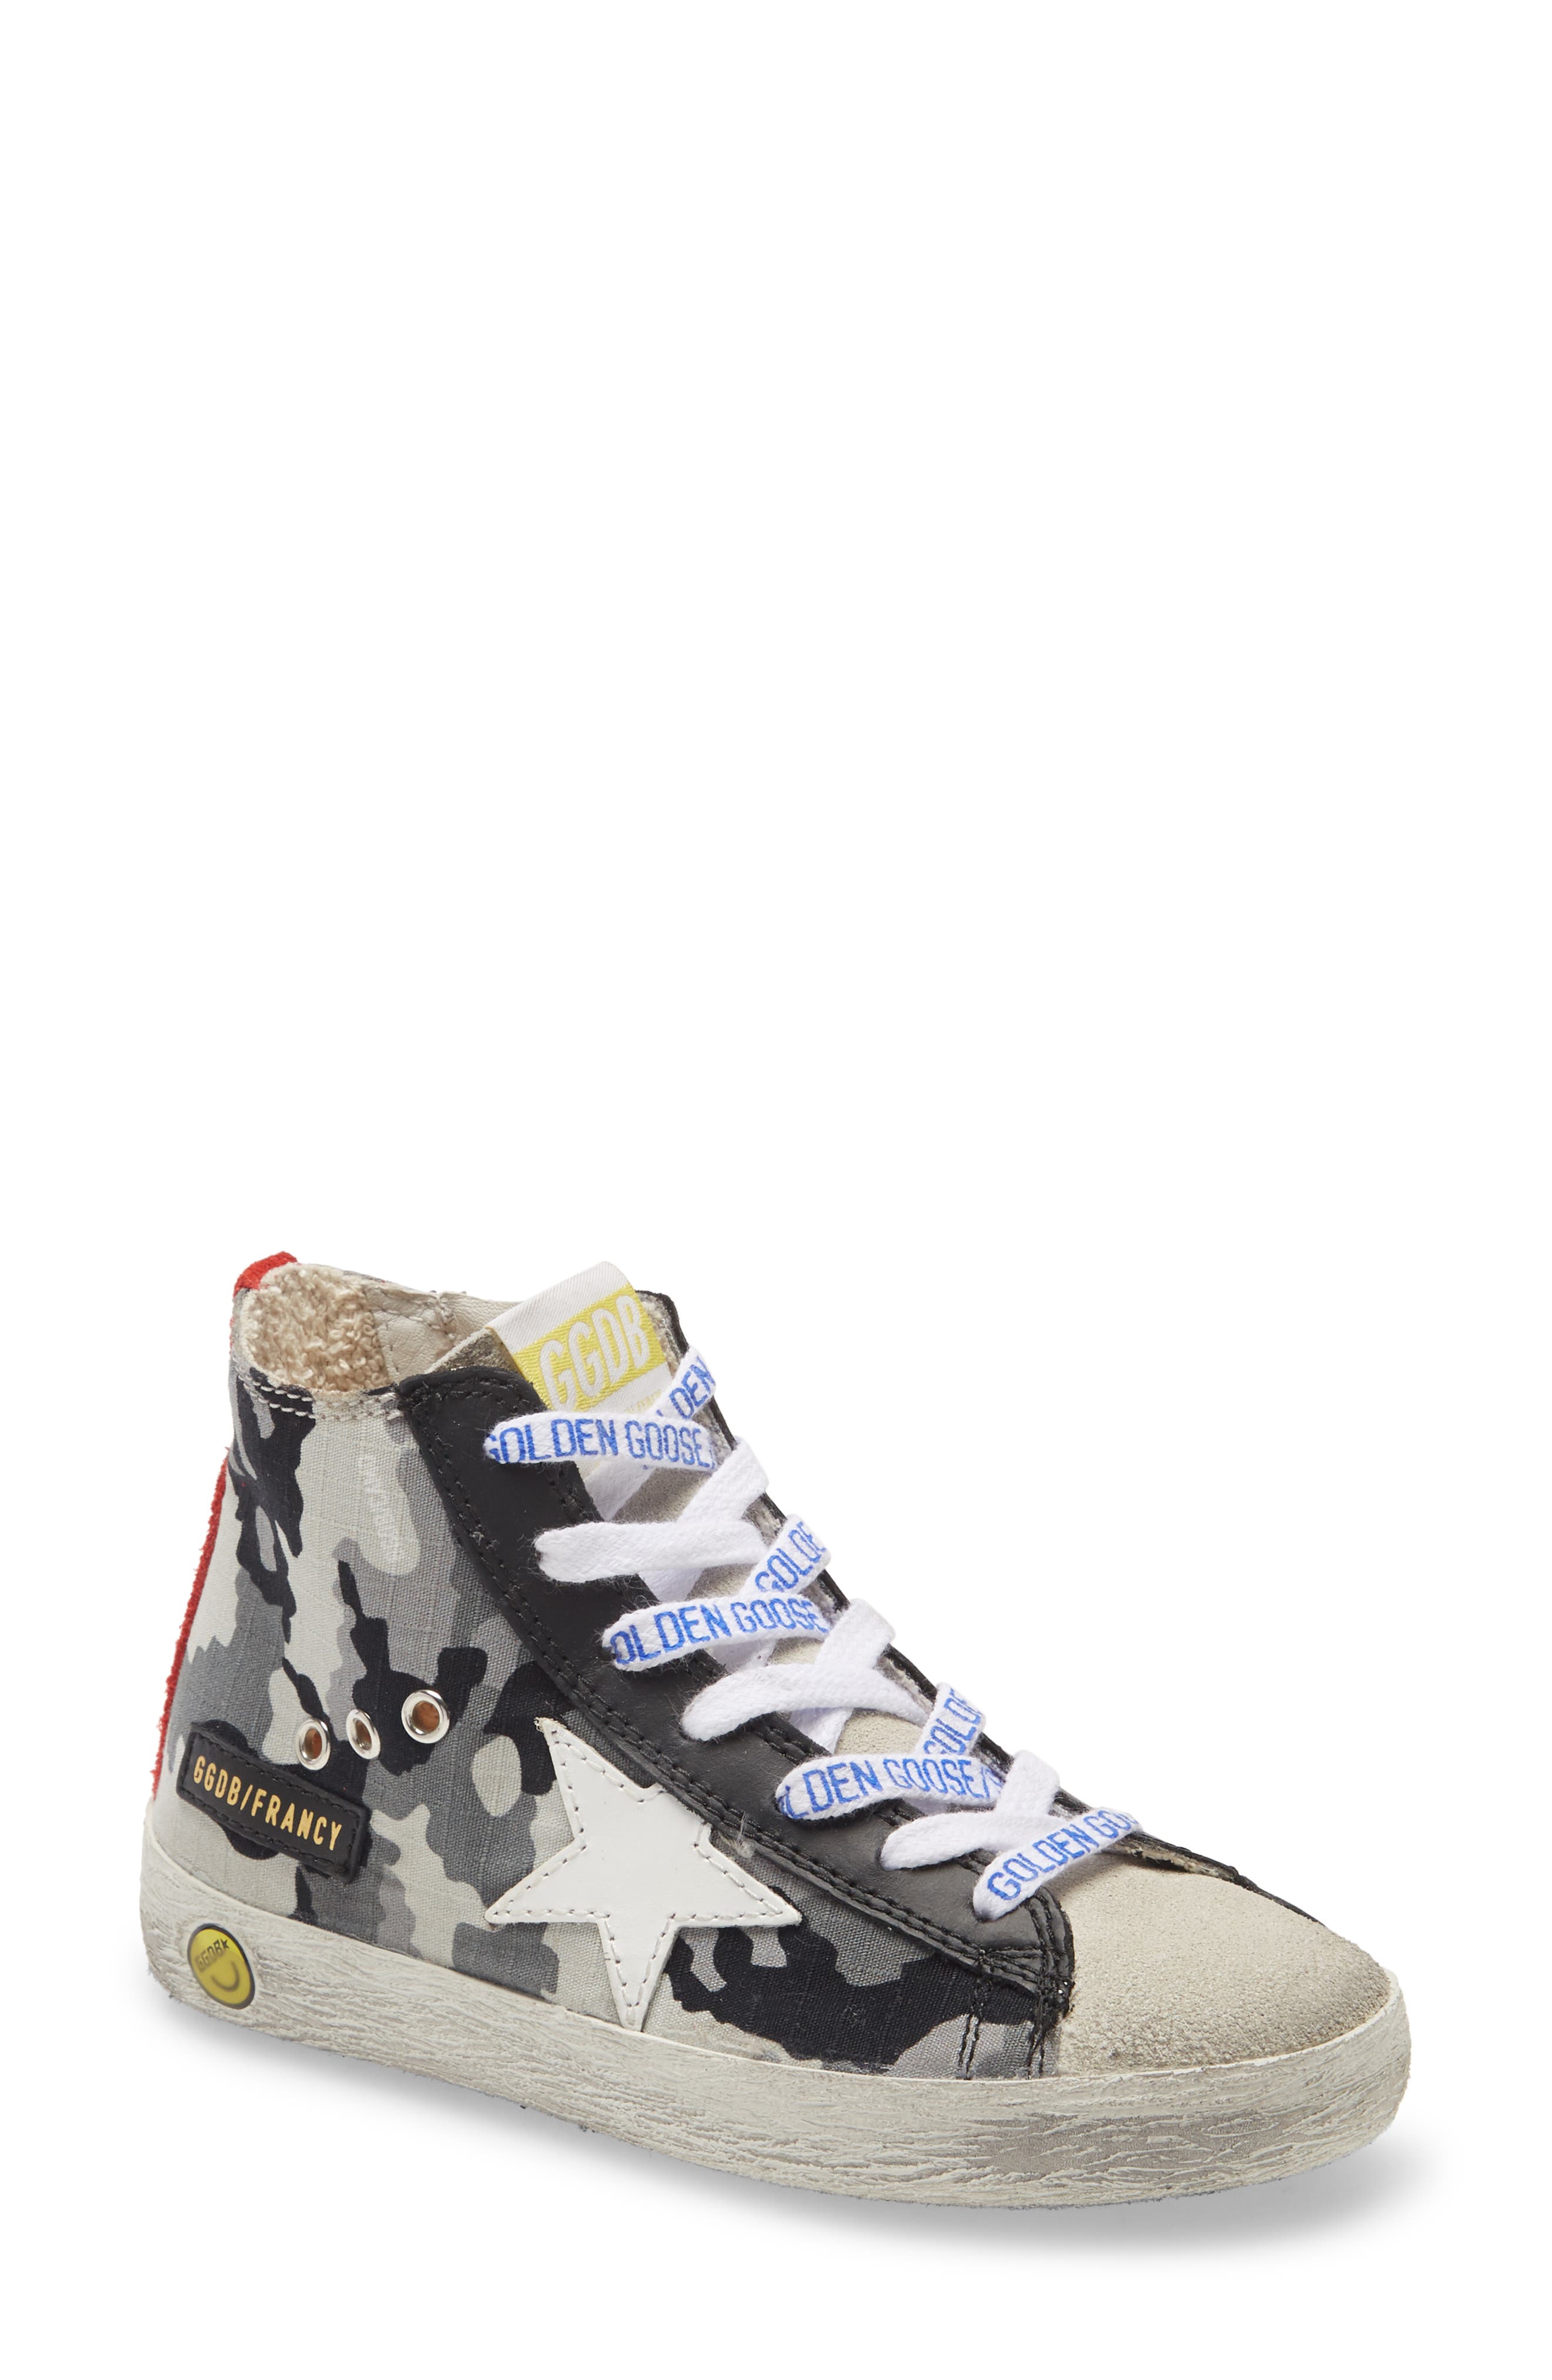 Golden Goose Francy High Top Sneaker in Grey/Ice/White/Ruby at Nordstrom, Size 9.5Us